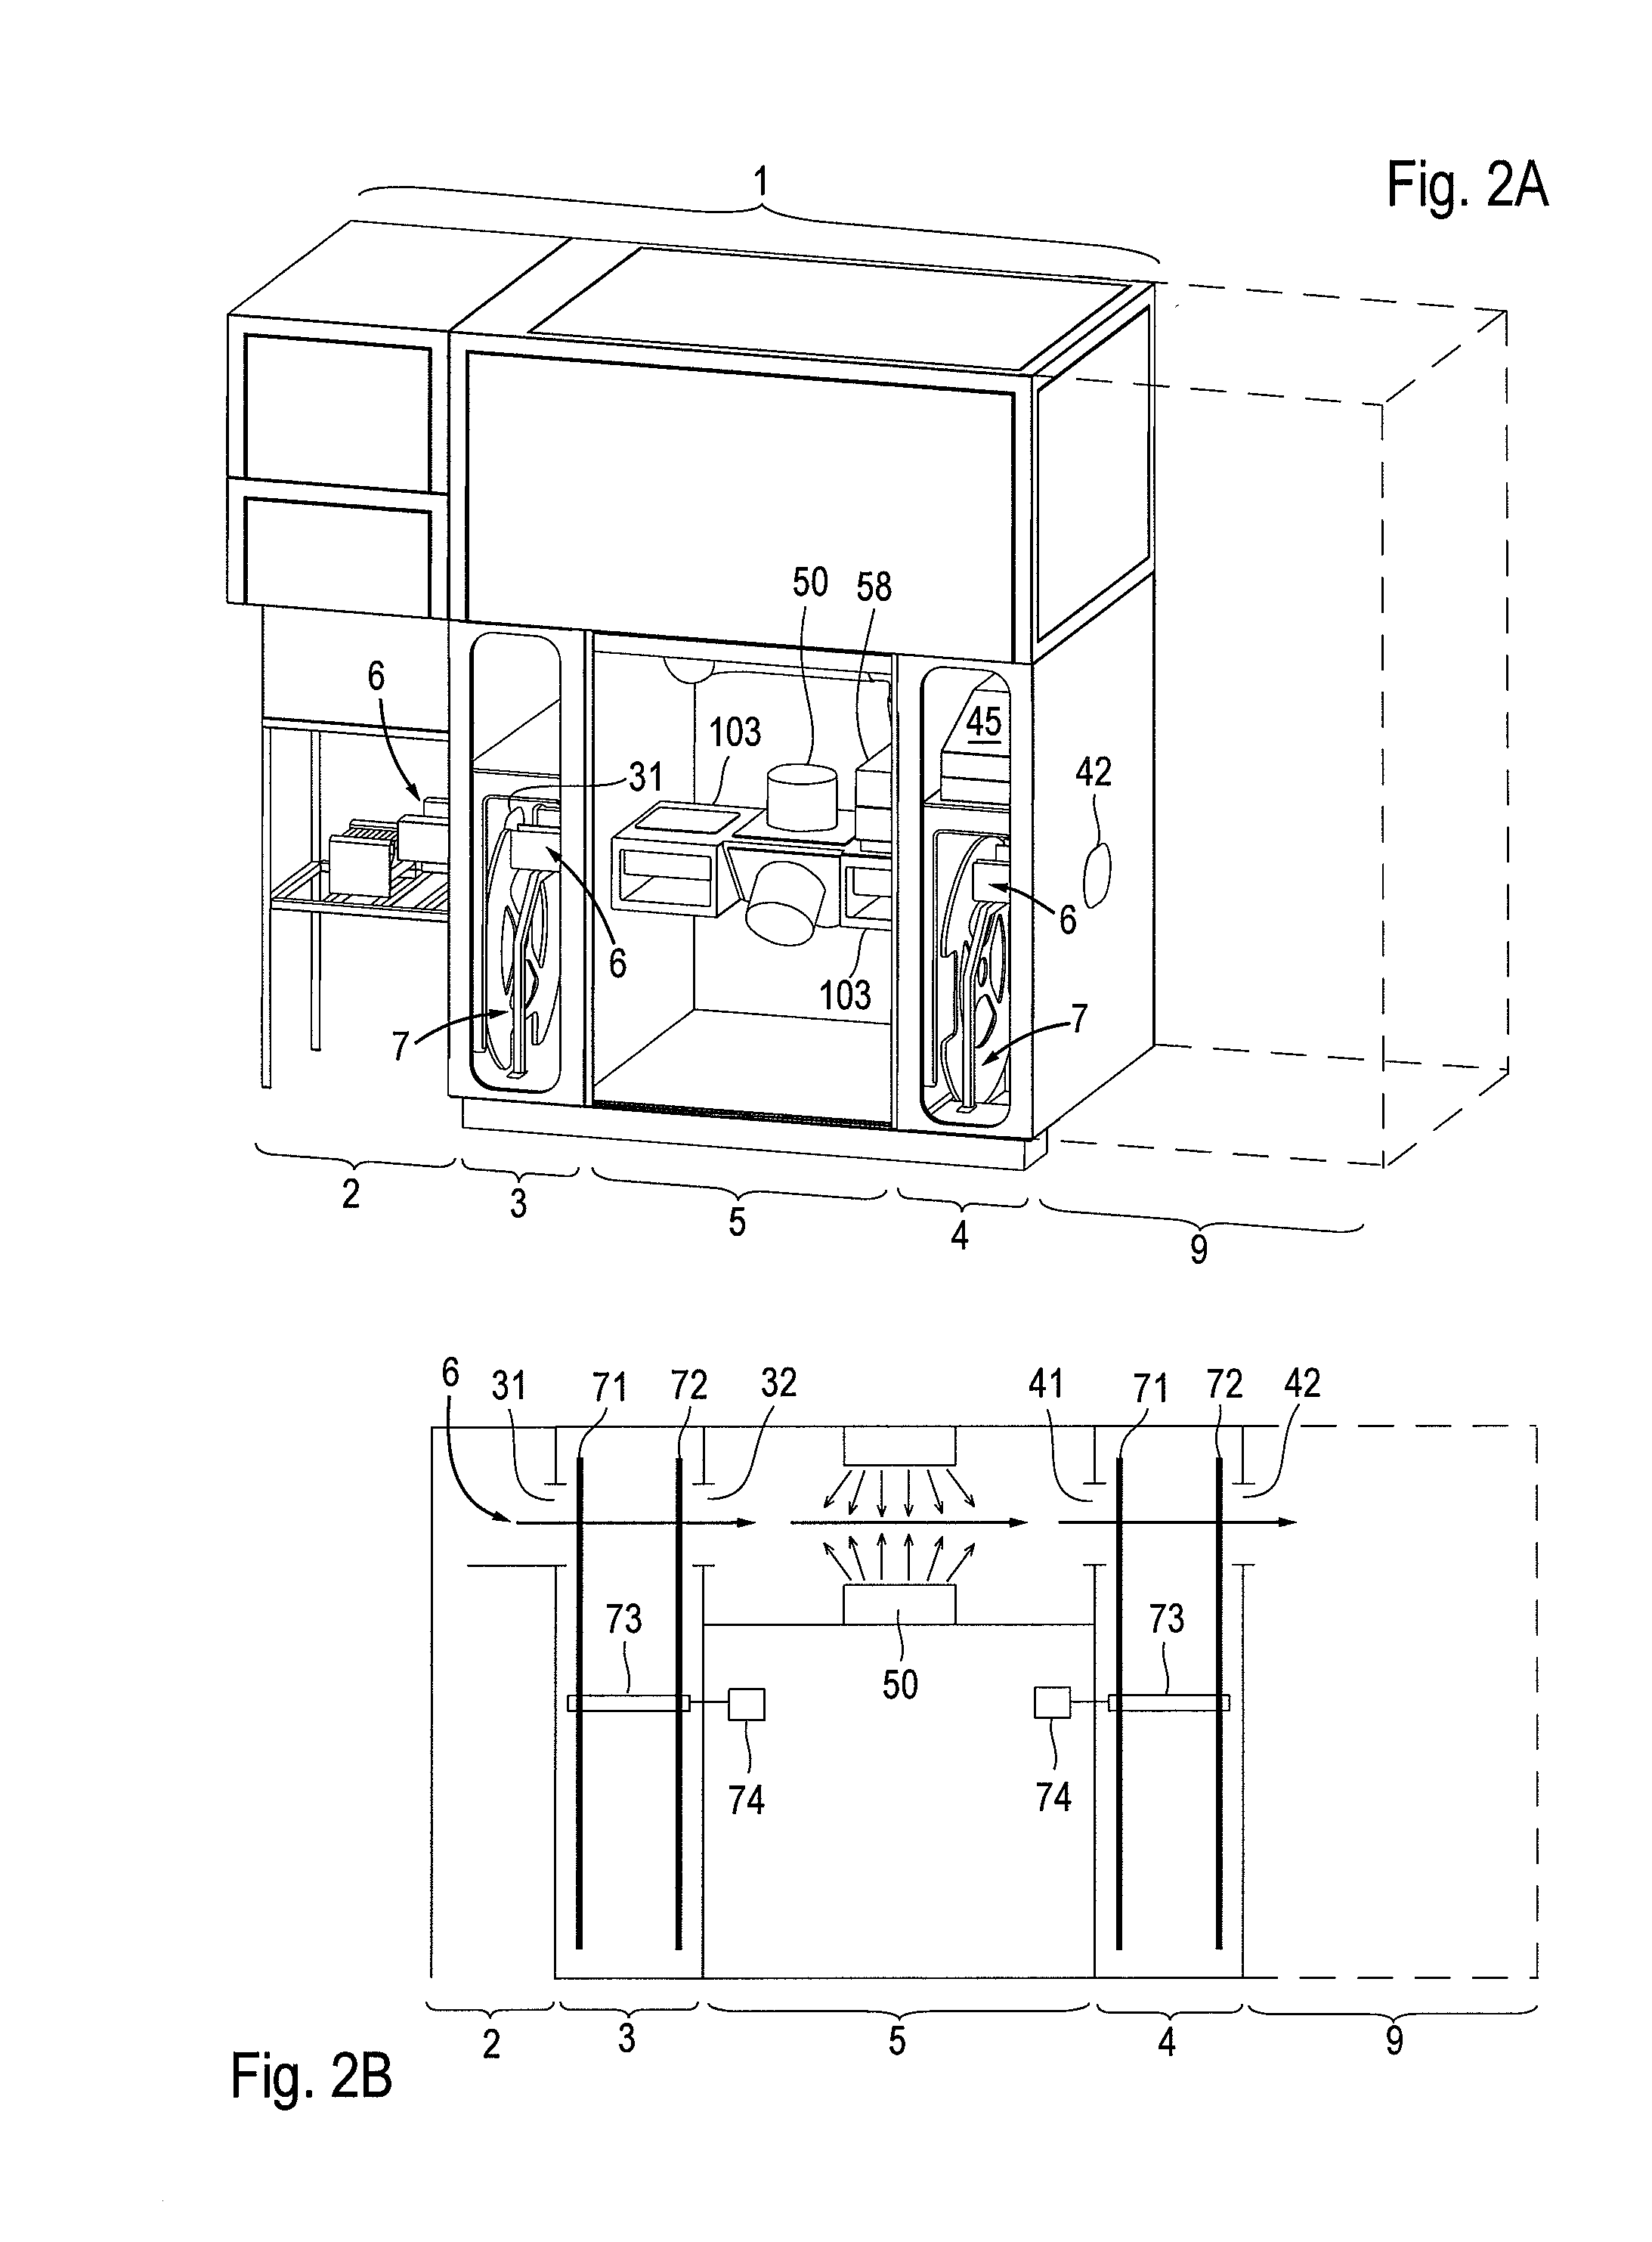 Installation for sterilizing objects by means of a radiation source